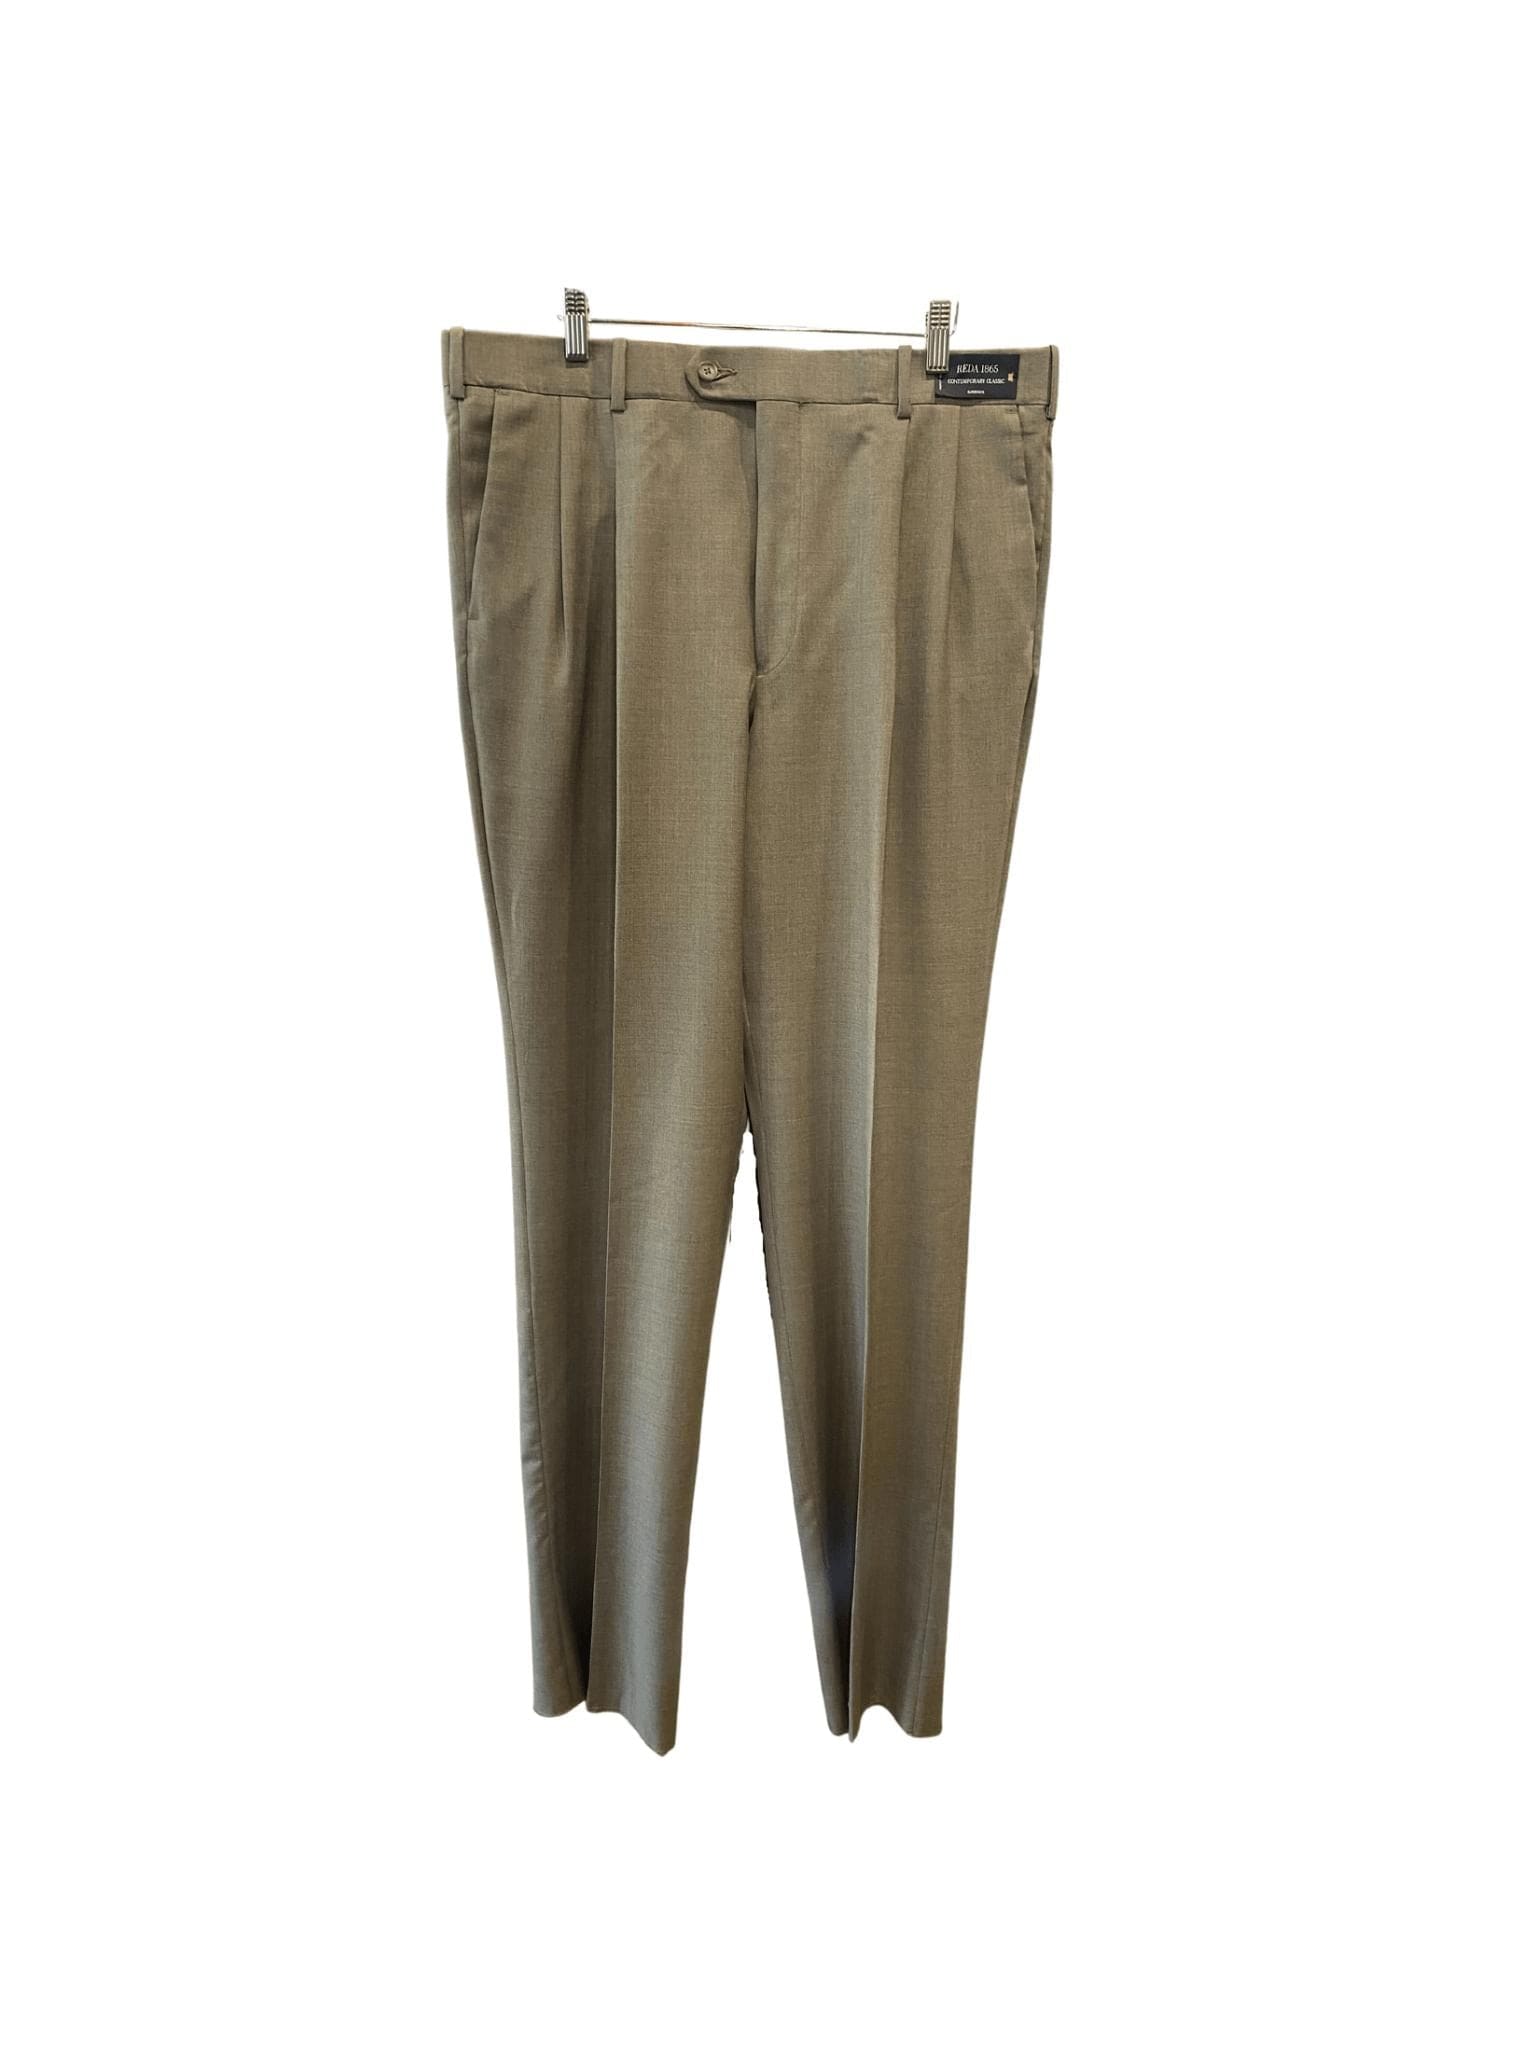 Coppley Men's Pants Taupe Grey / 36 Coppley Pleated Dress Trousers